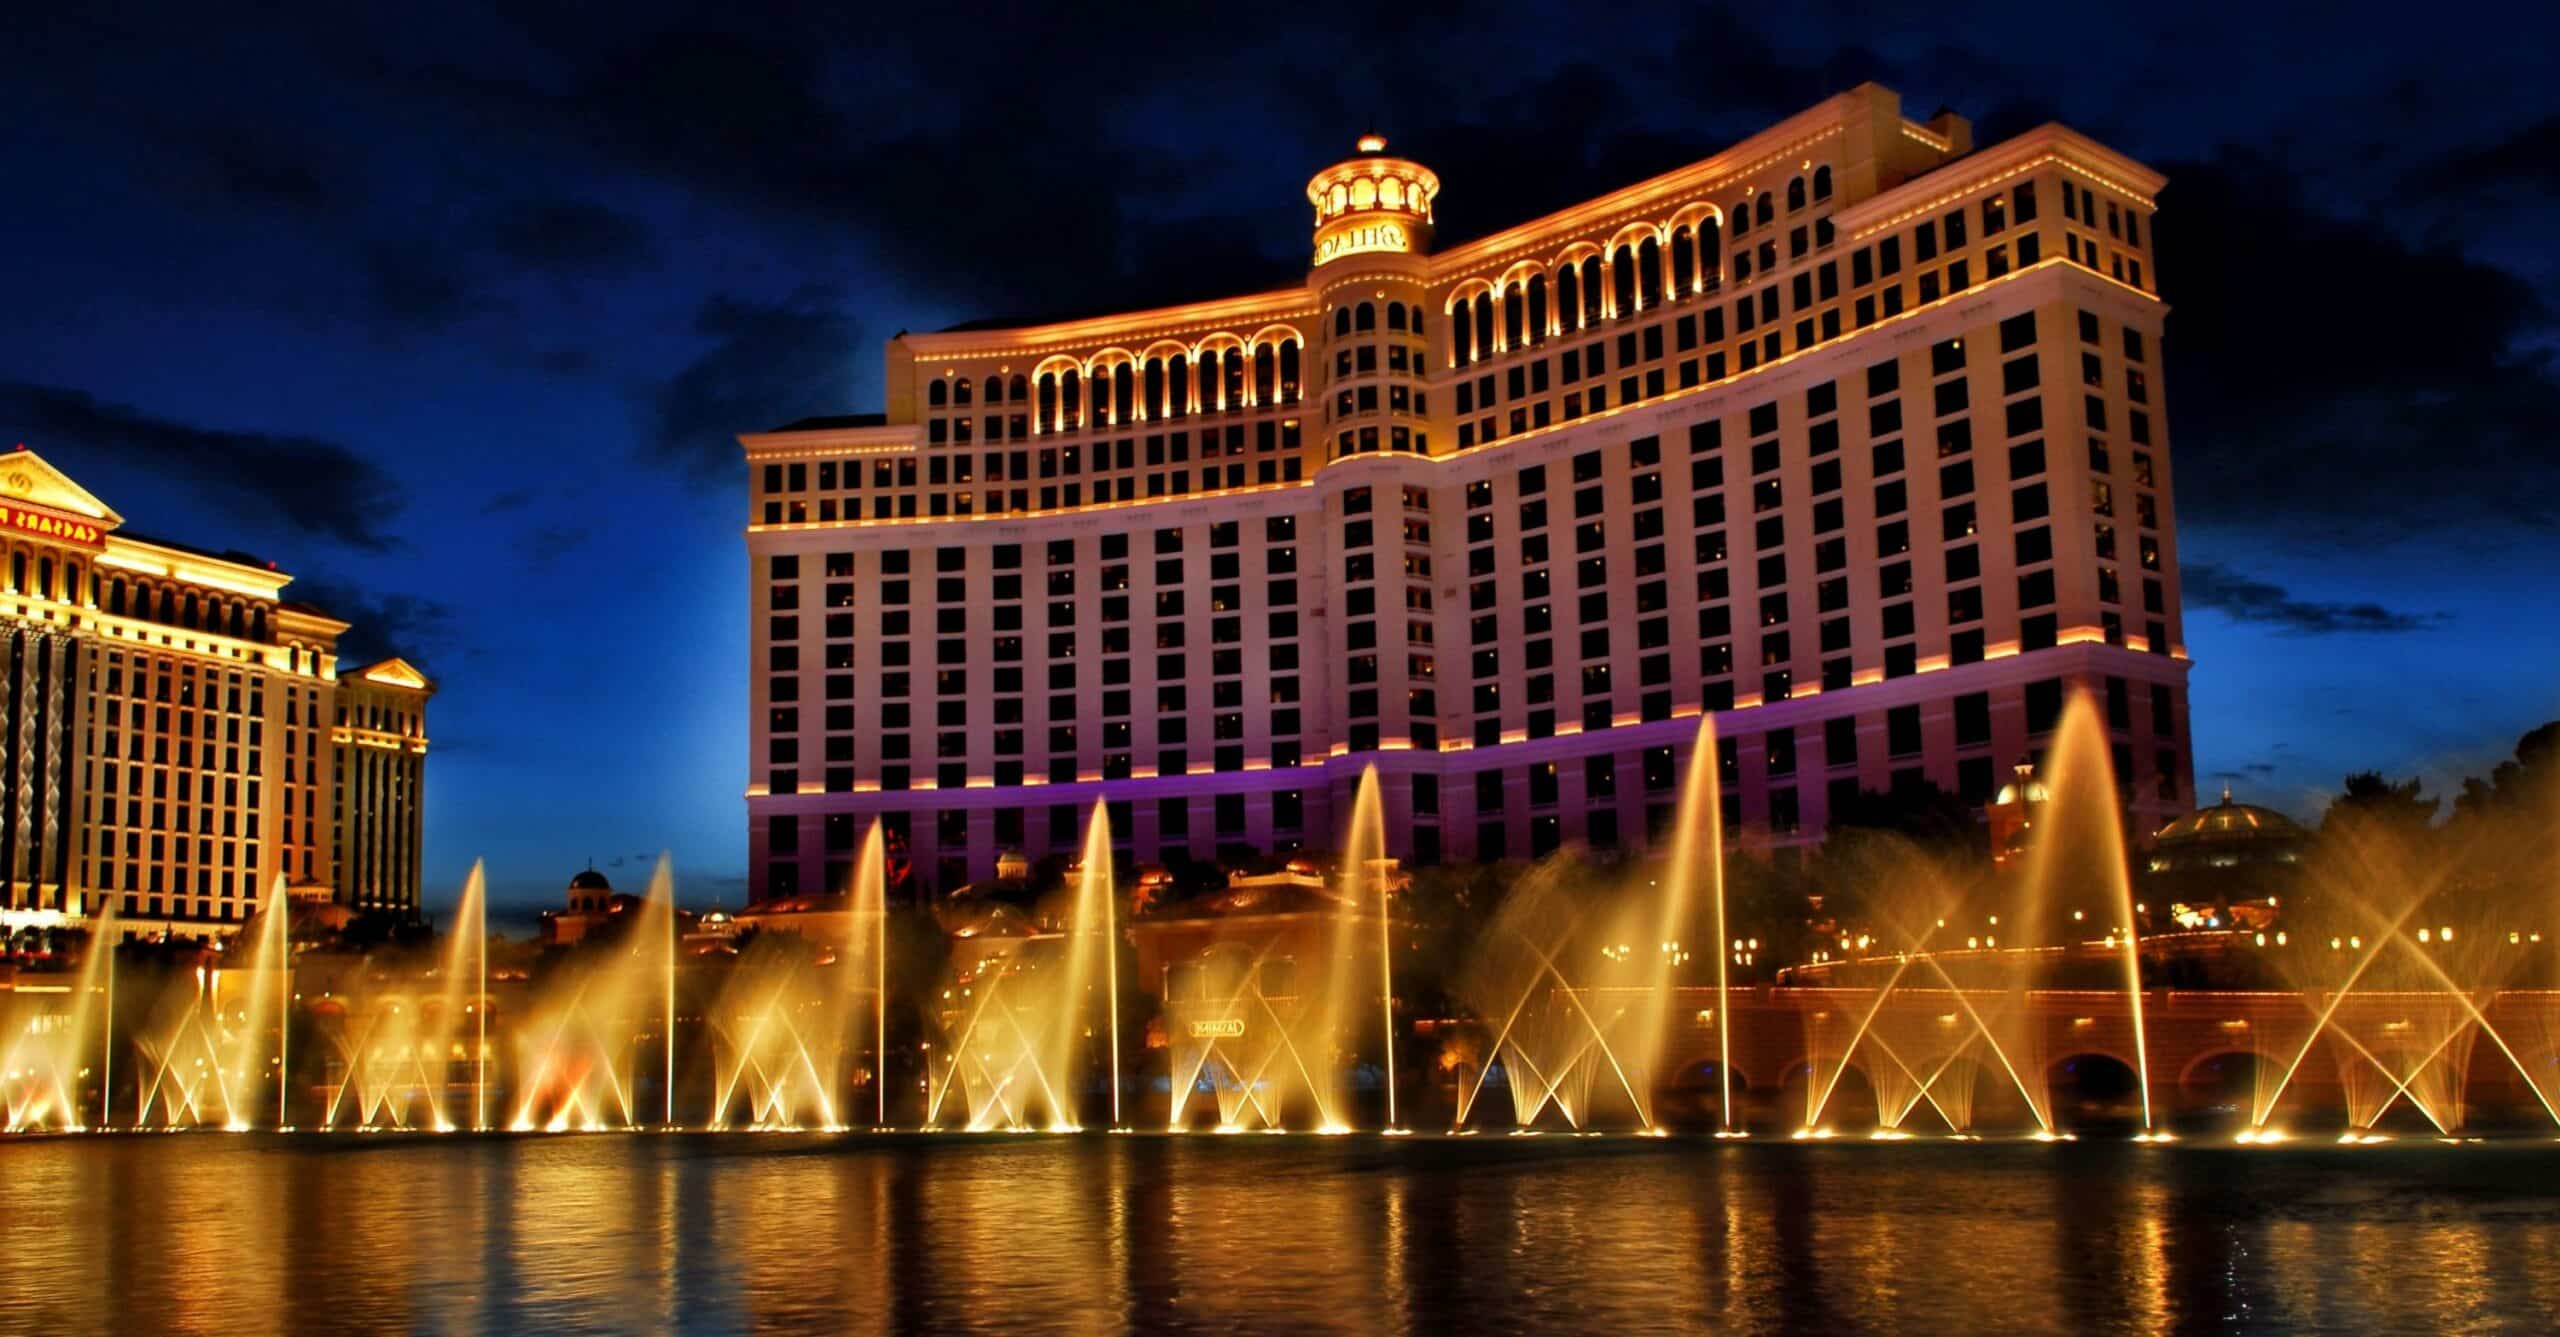 Bellagio Resort at night with gold fountain water